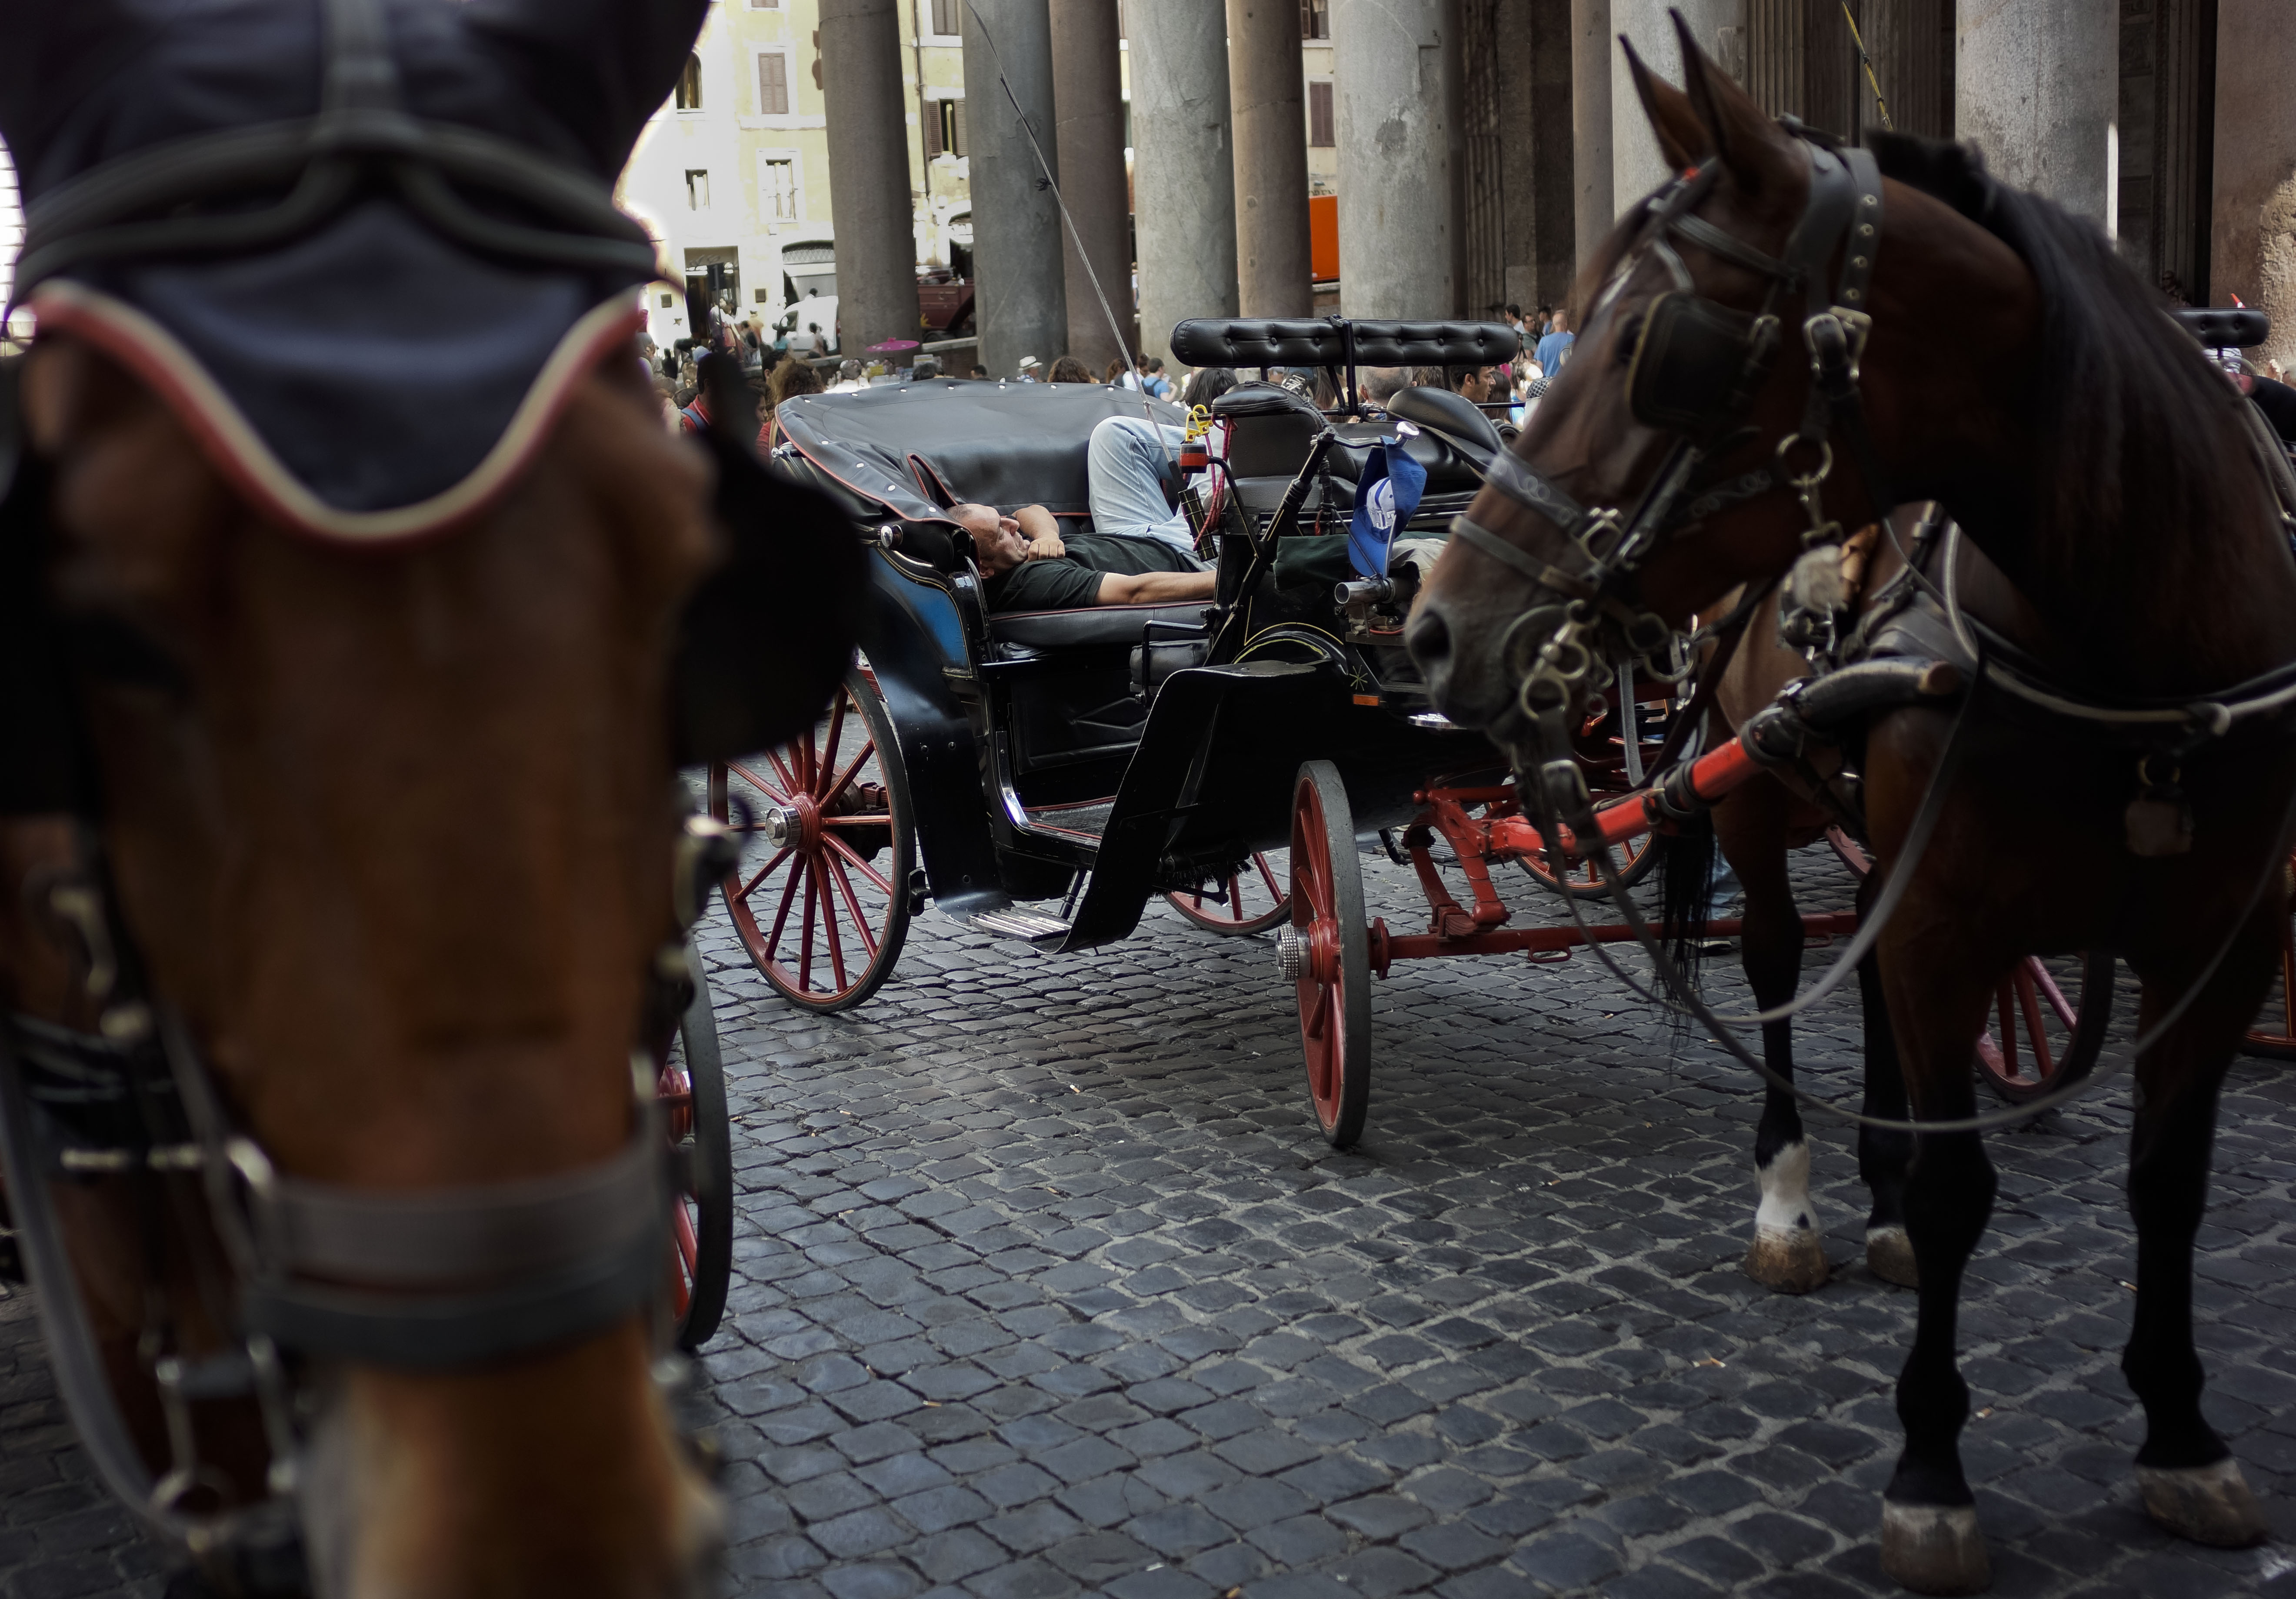 A carriage driver waits for clients in front of Rome's Pantheon, Friday, June 28, 2013. Roman horse carriages are very popular among tourists to get around town, especially in the Summer. (AP Photo/Domenico Stinellis)